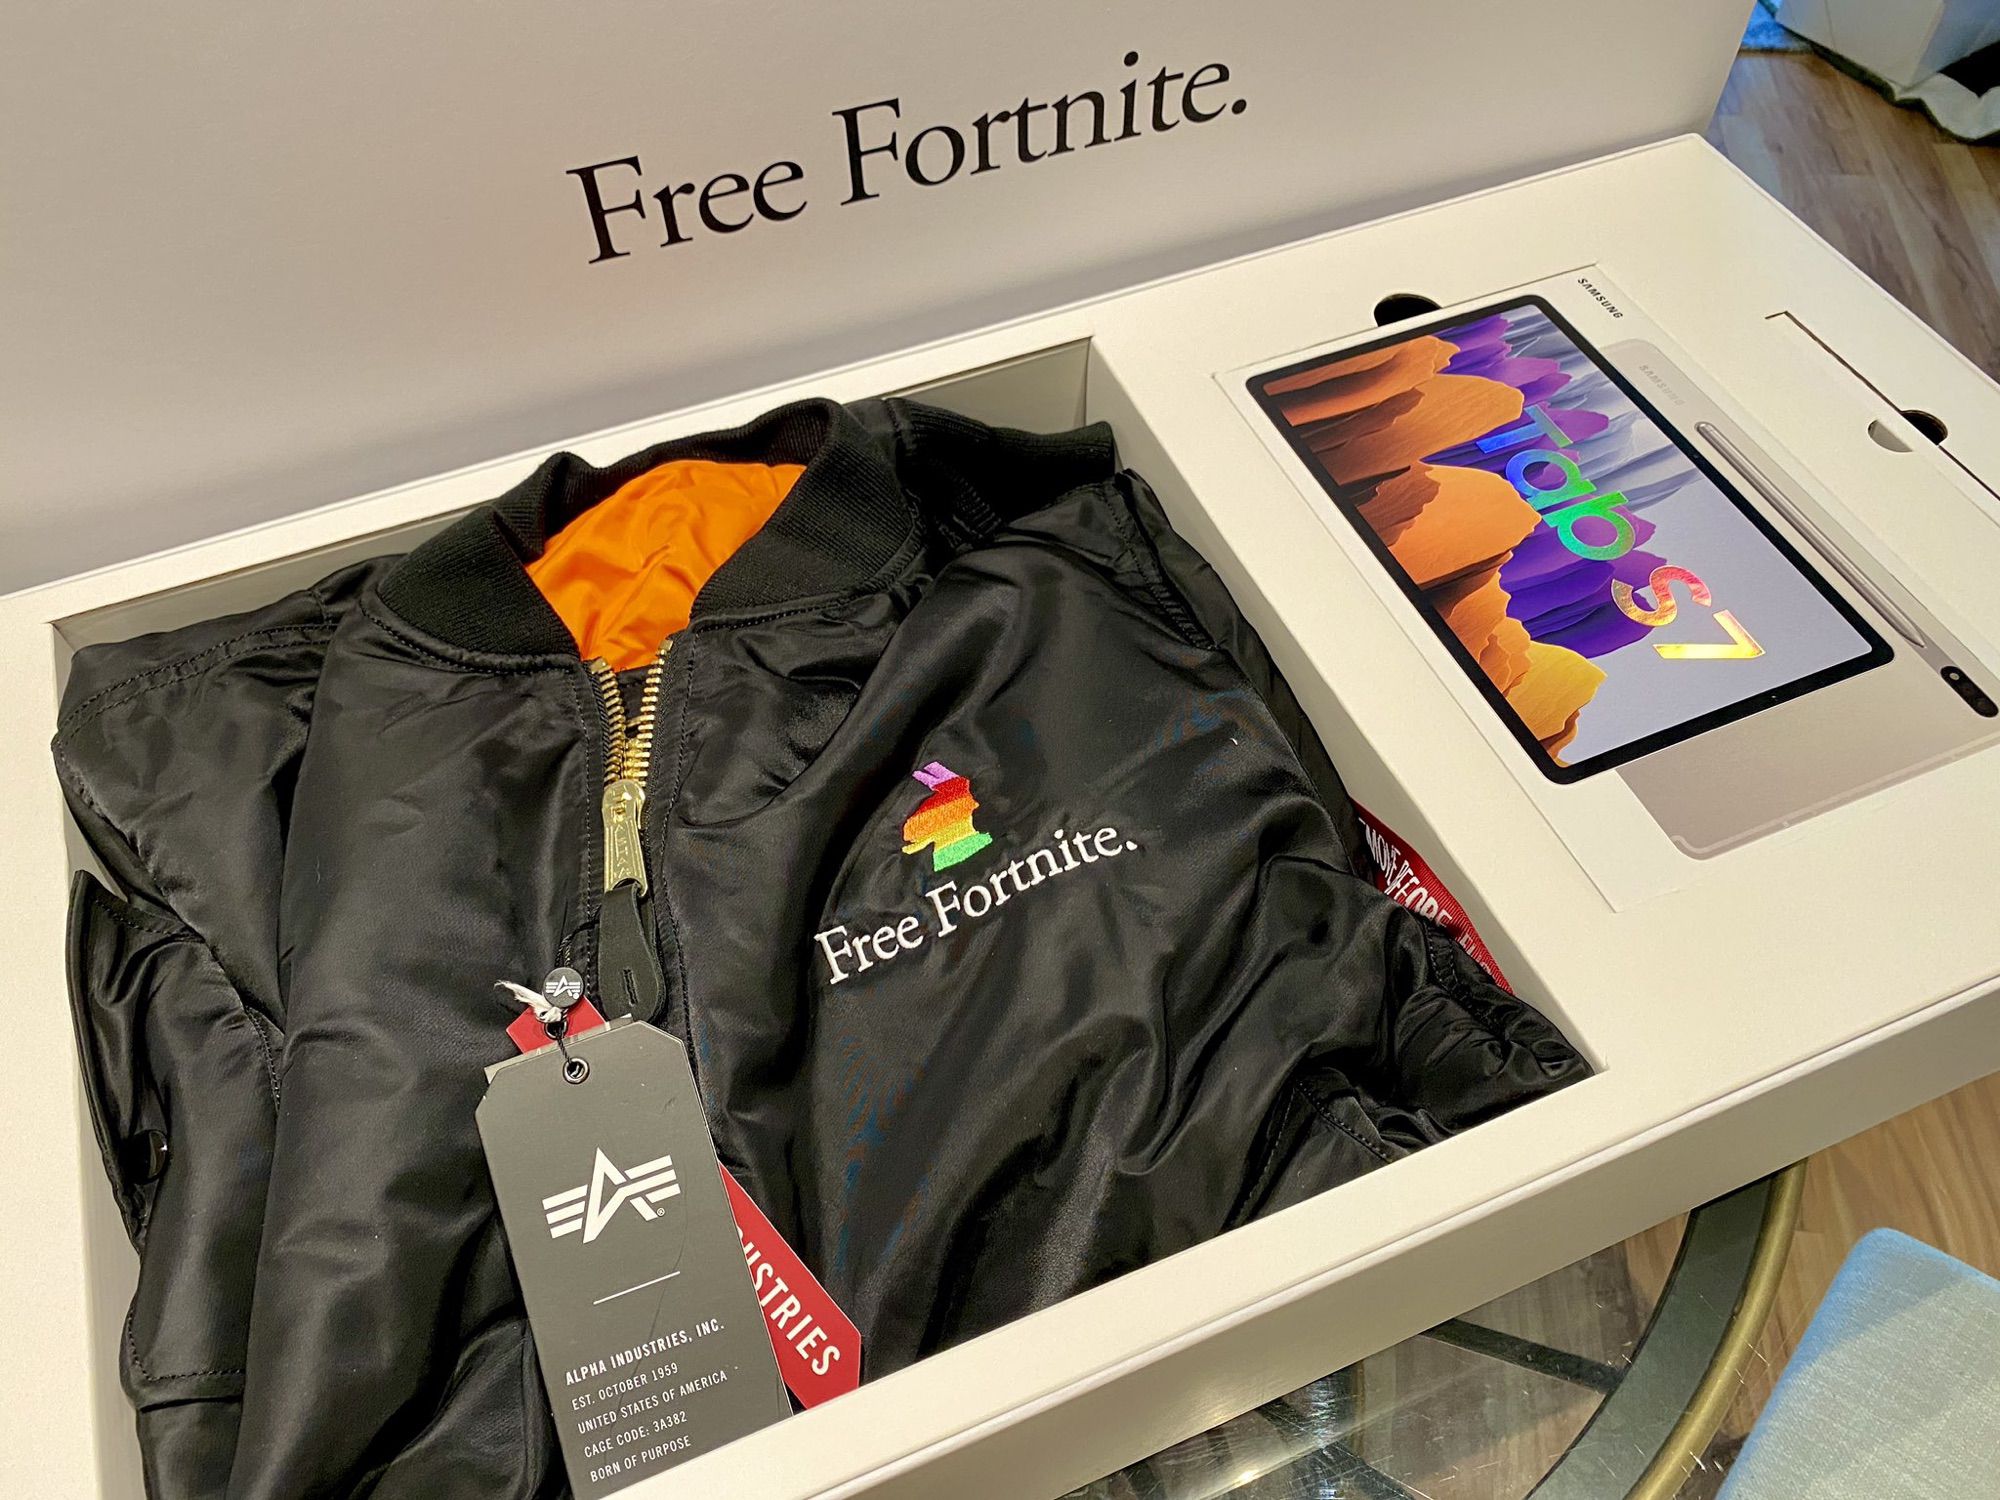 Epic Games and Samsung Send 'Free Fortnite' Swag to Influencers With Galaxy Tab S7